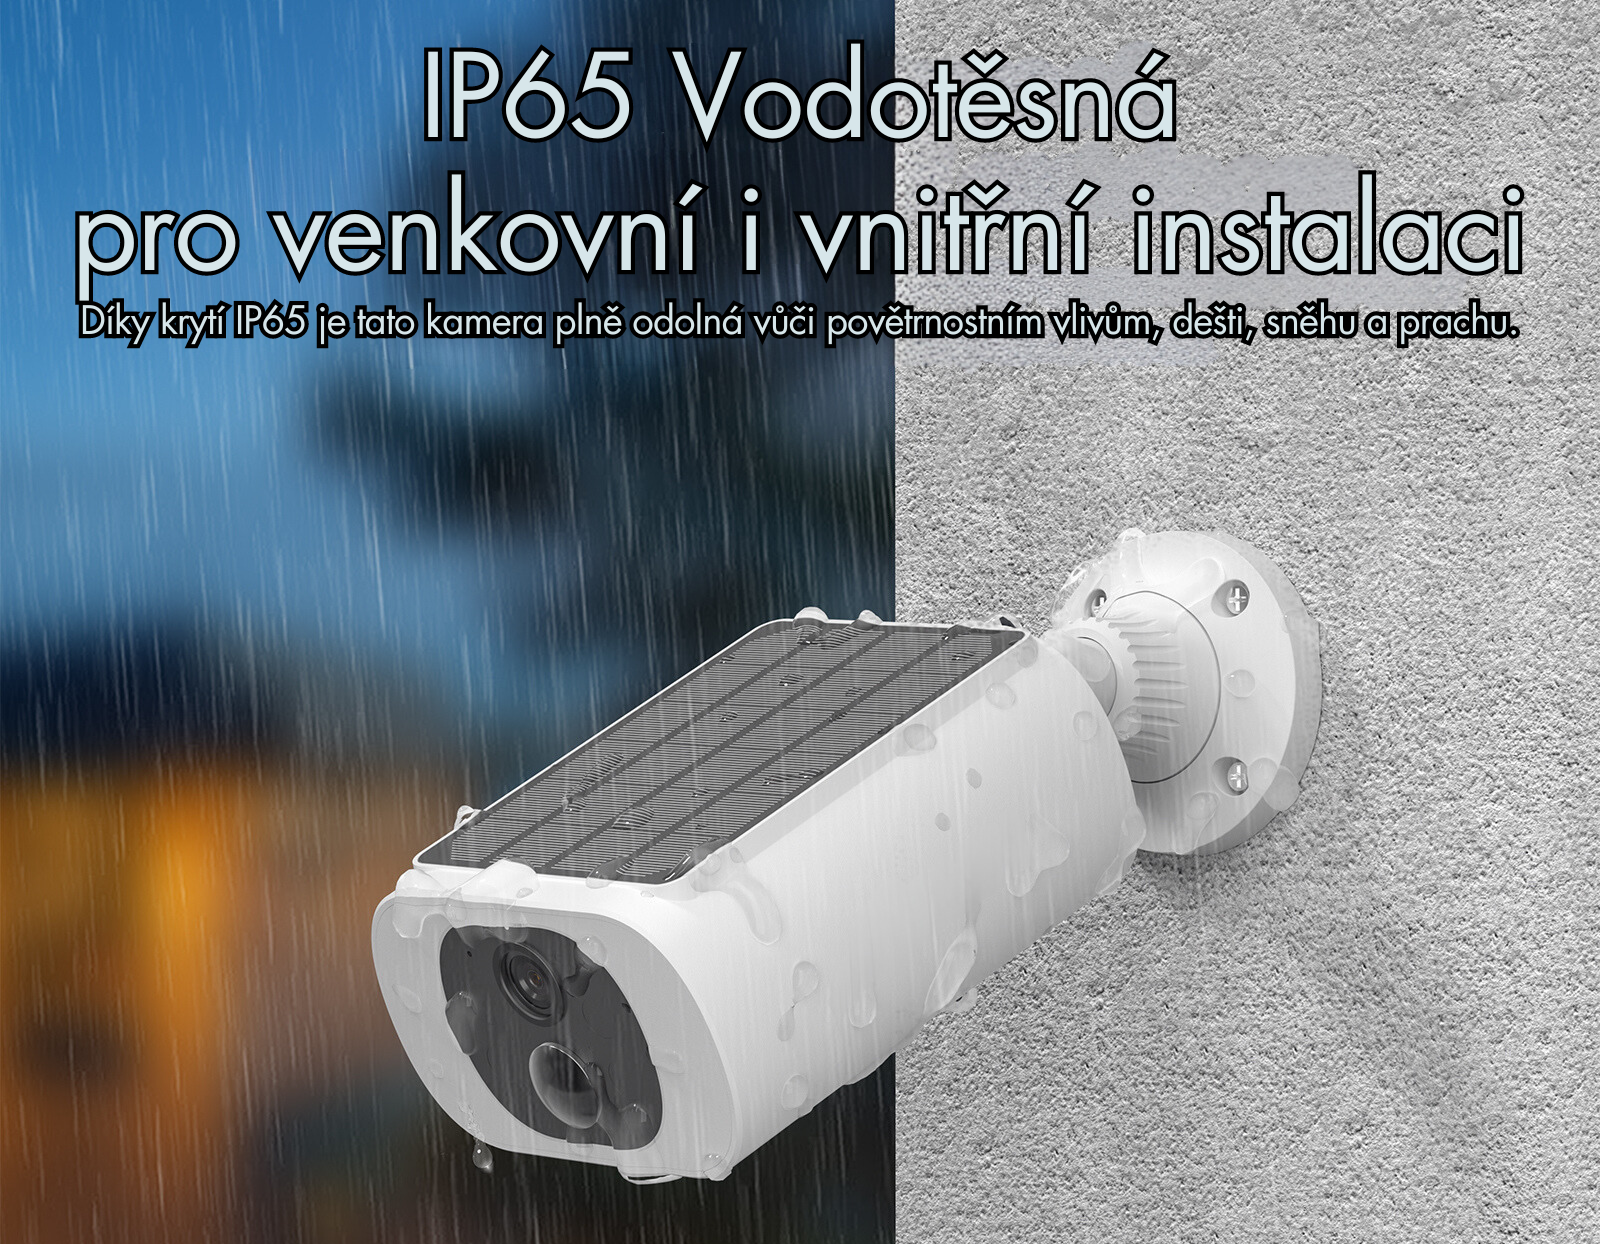 IP65 Vodotěsná pro venkovní i vnitřní instalaci With an IP65 rating,this camera is fully weatherproof and can withstand rain, snow, and dust.